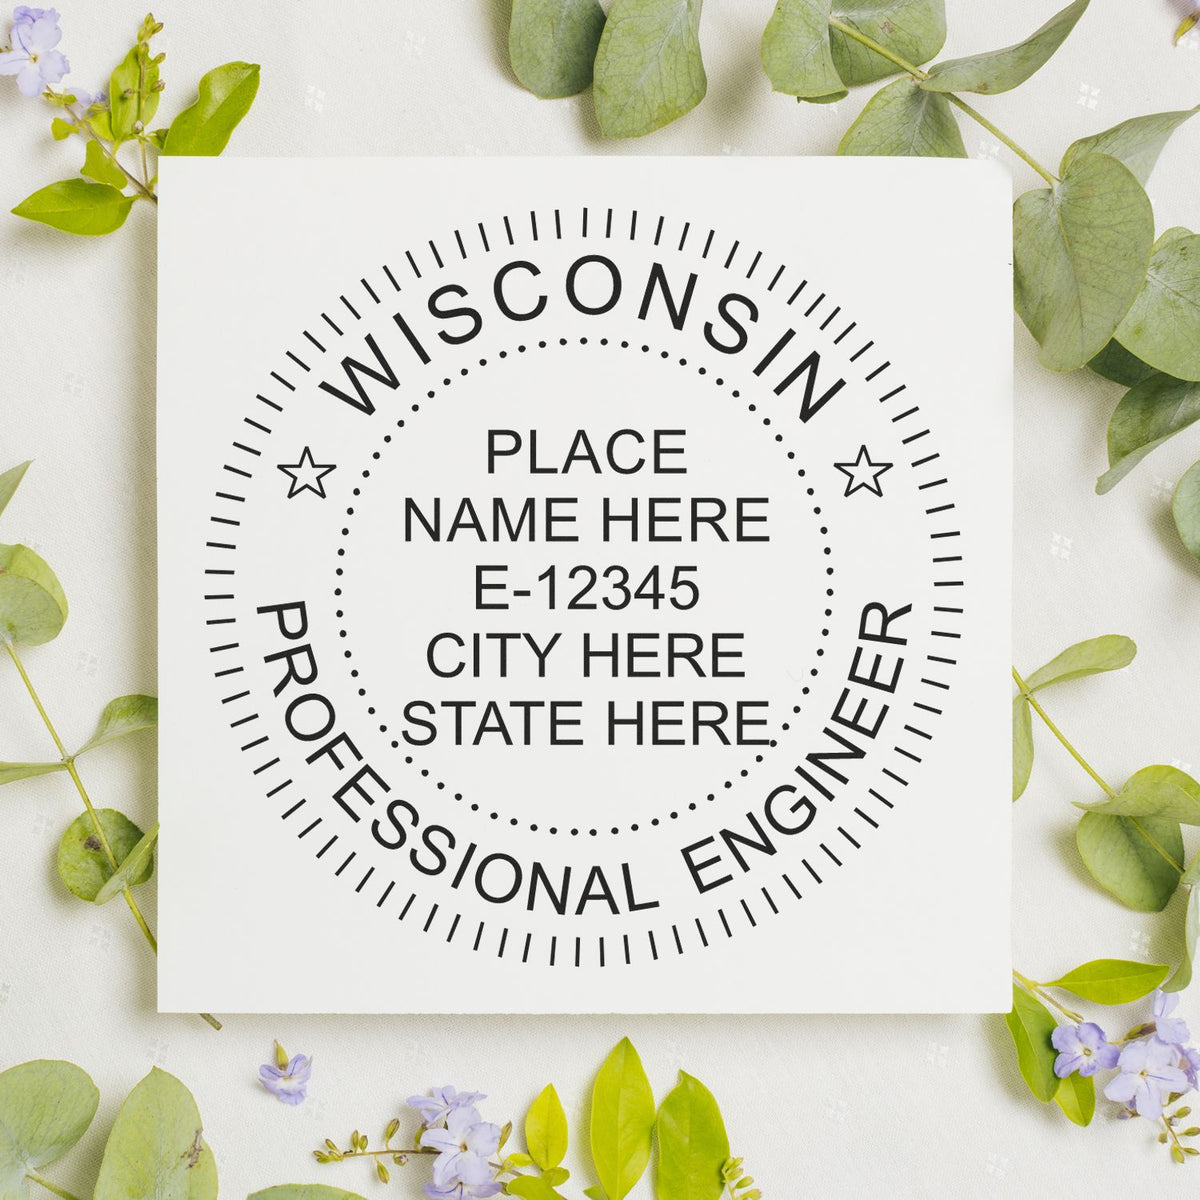 A lifestyle photo showing a stamped image of the Wisconsin Professional Engineer Seal Stamp on a piece of paper